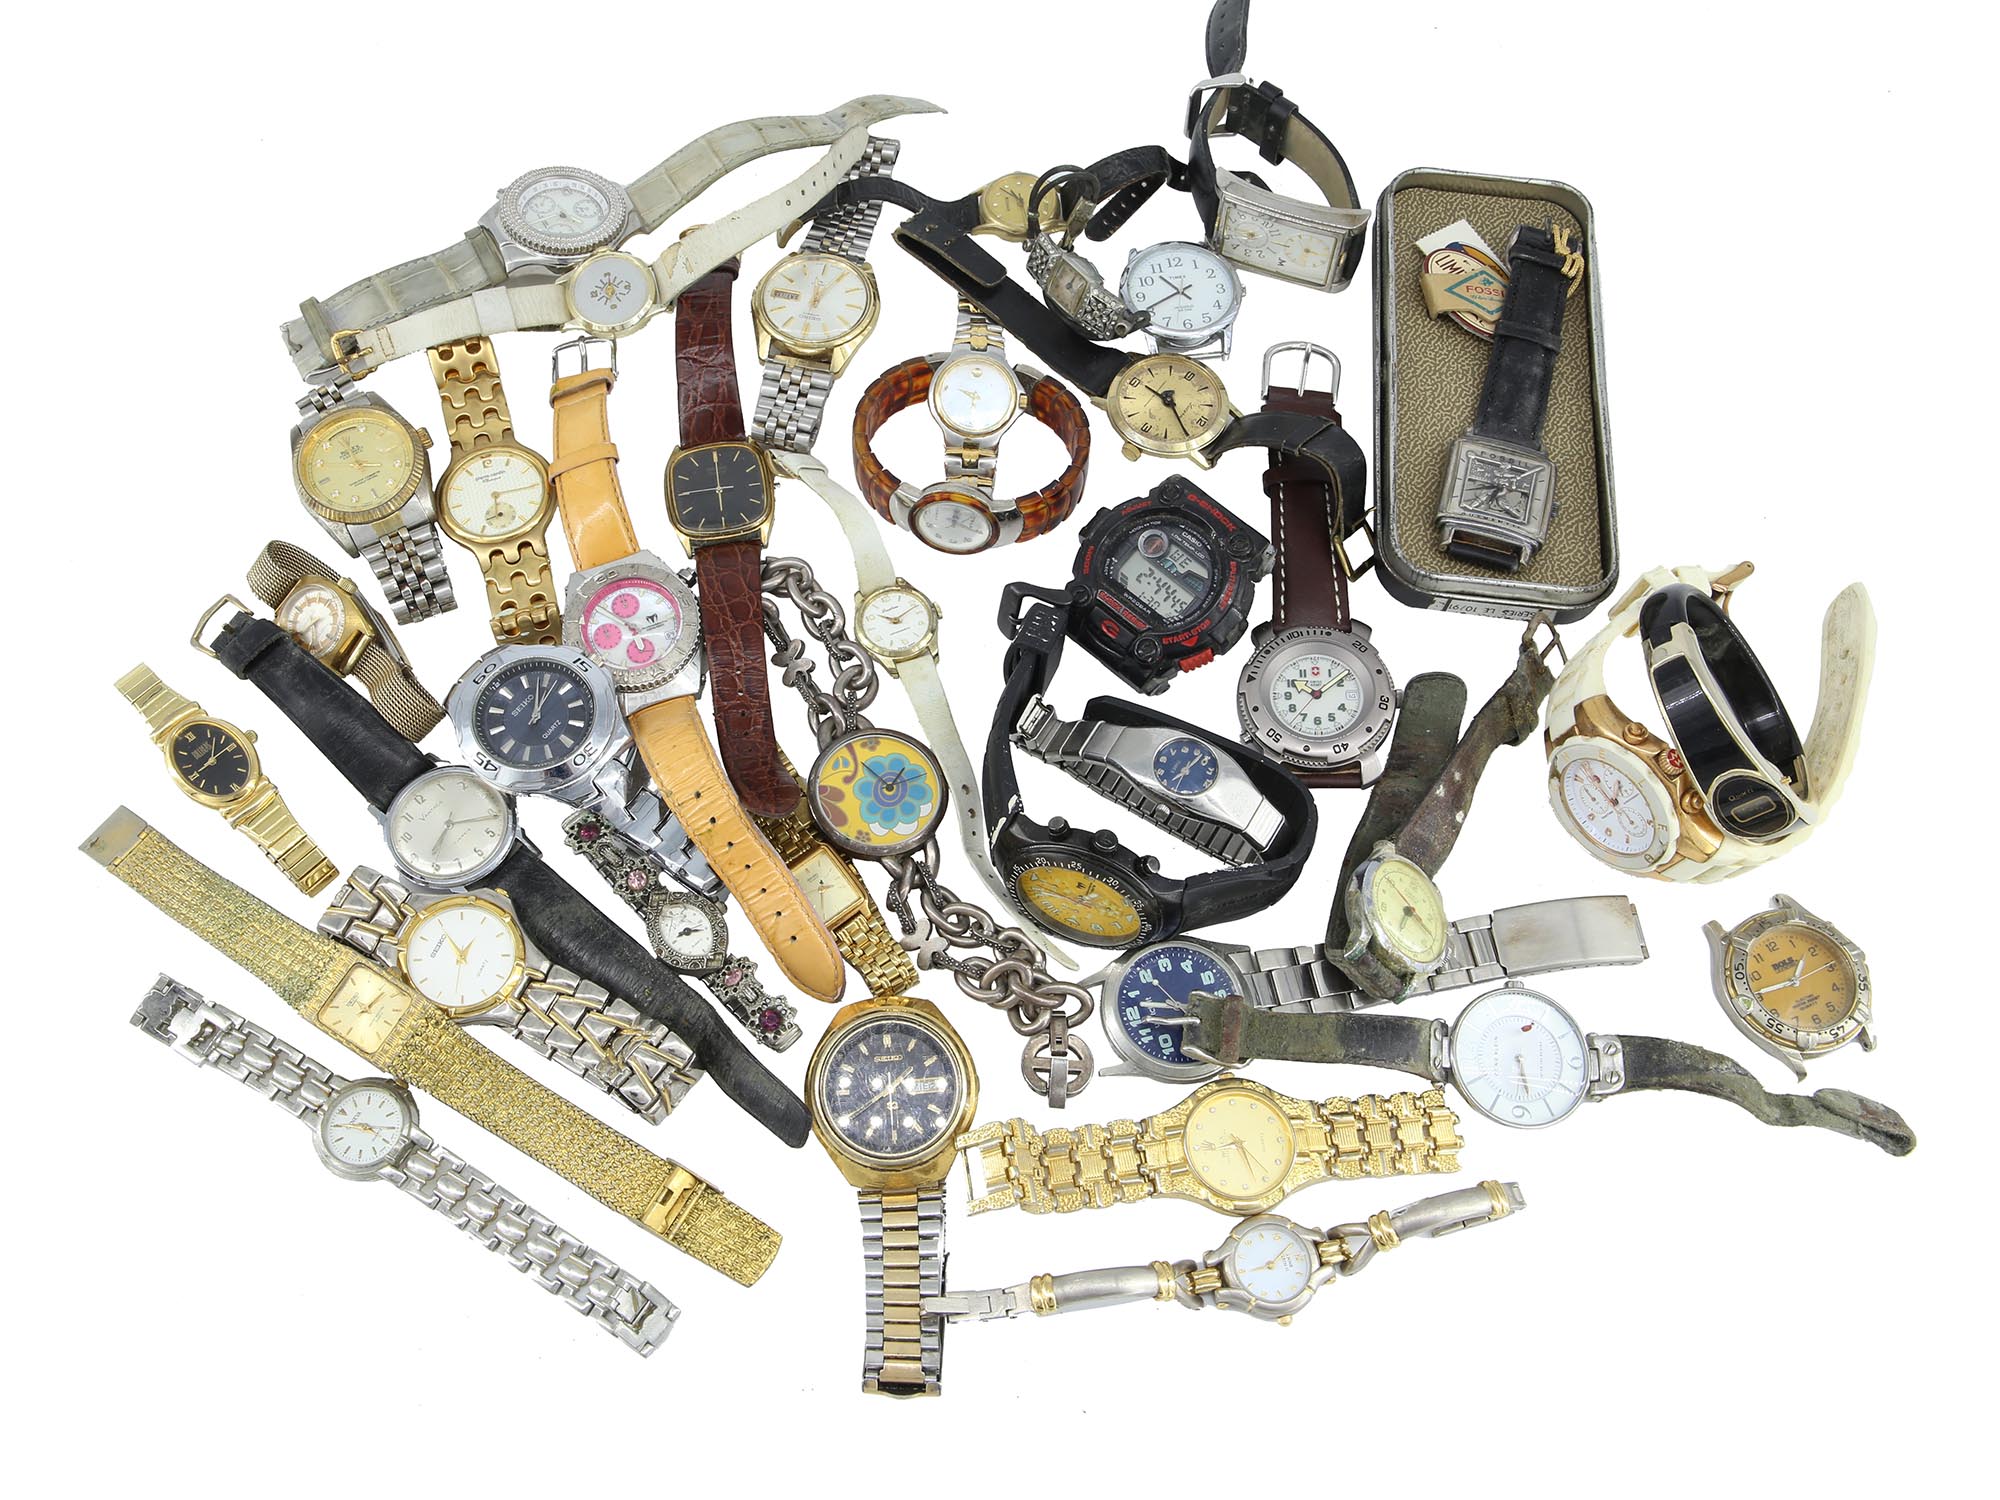 LARGE COLLECTION OF VINTAGE MODERN WRIST WATCHES PIC-0